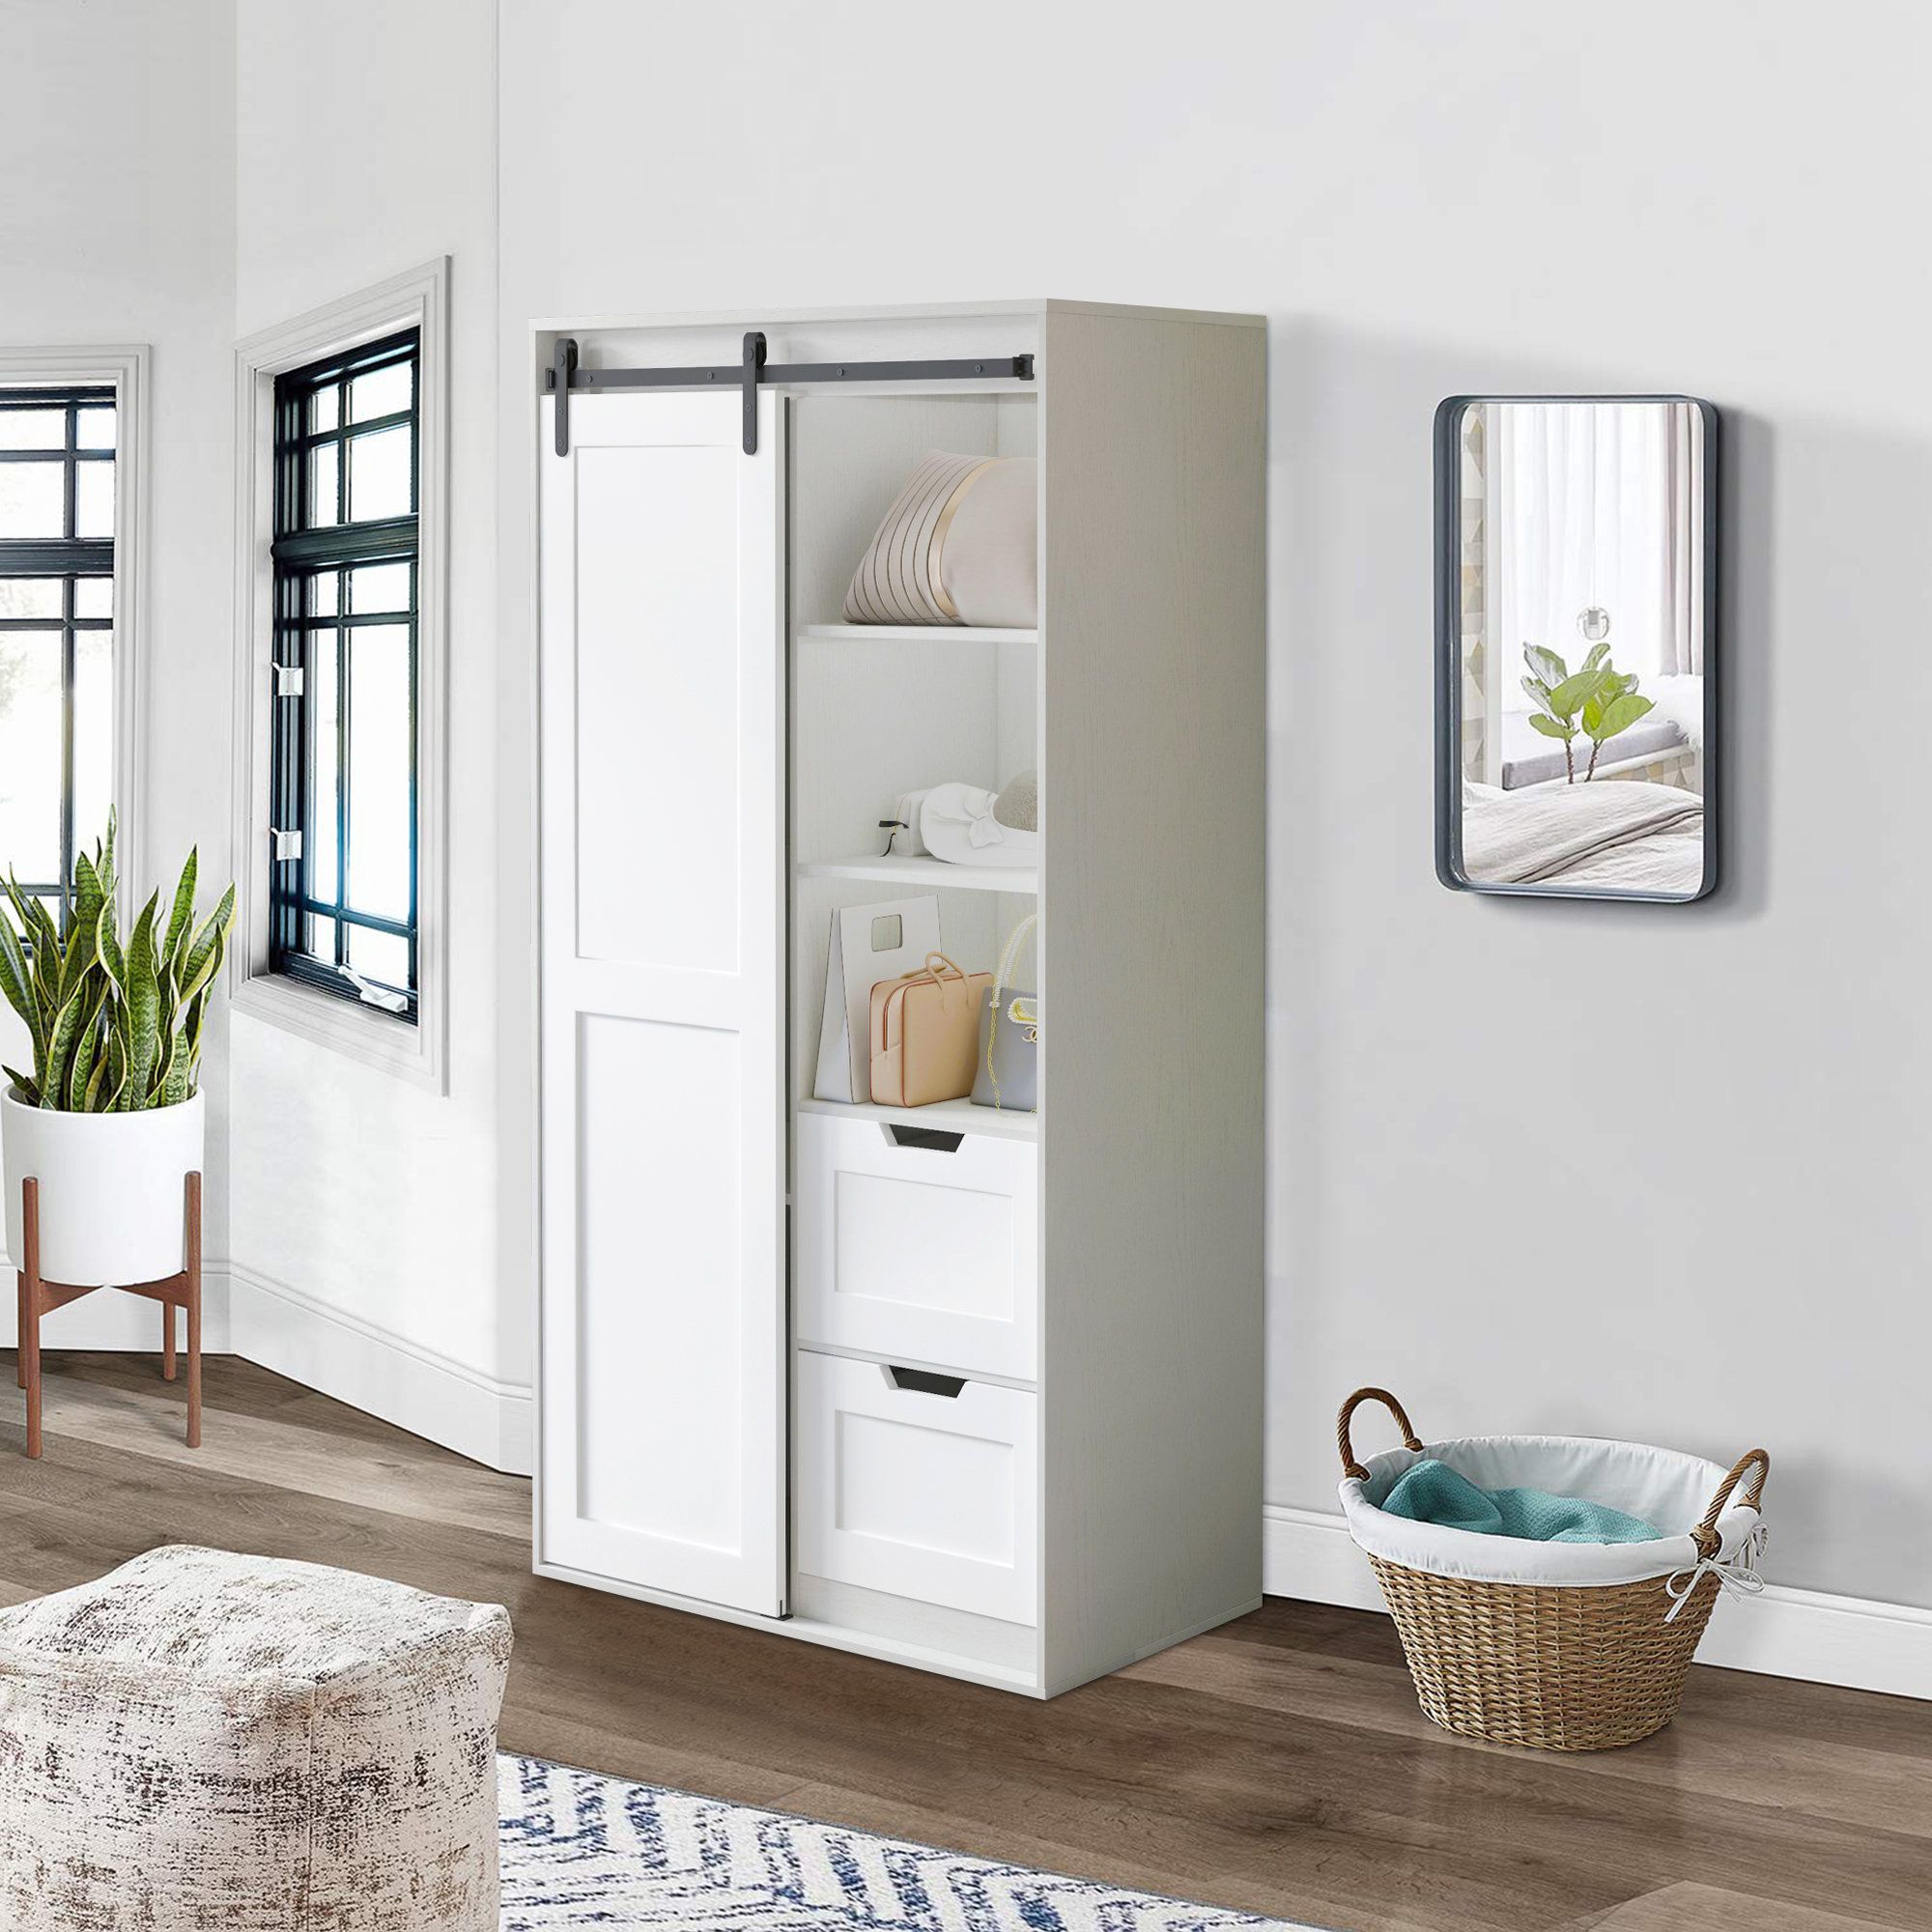 Gracie Oaks Cathkin 71"h Wardrobe Closet With Hanging Rod, Cabinet With 2  Drawers & 2 Shelves, Sliding Door | Wayfair Pertaining To Wardrobes With 3 Hanging Rod (View 13 of 20)